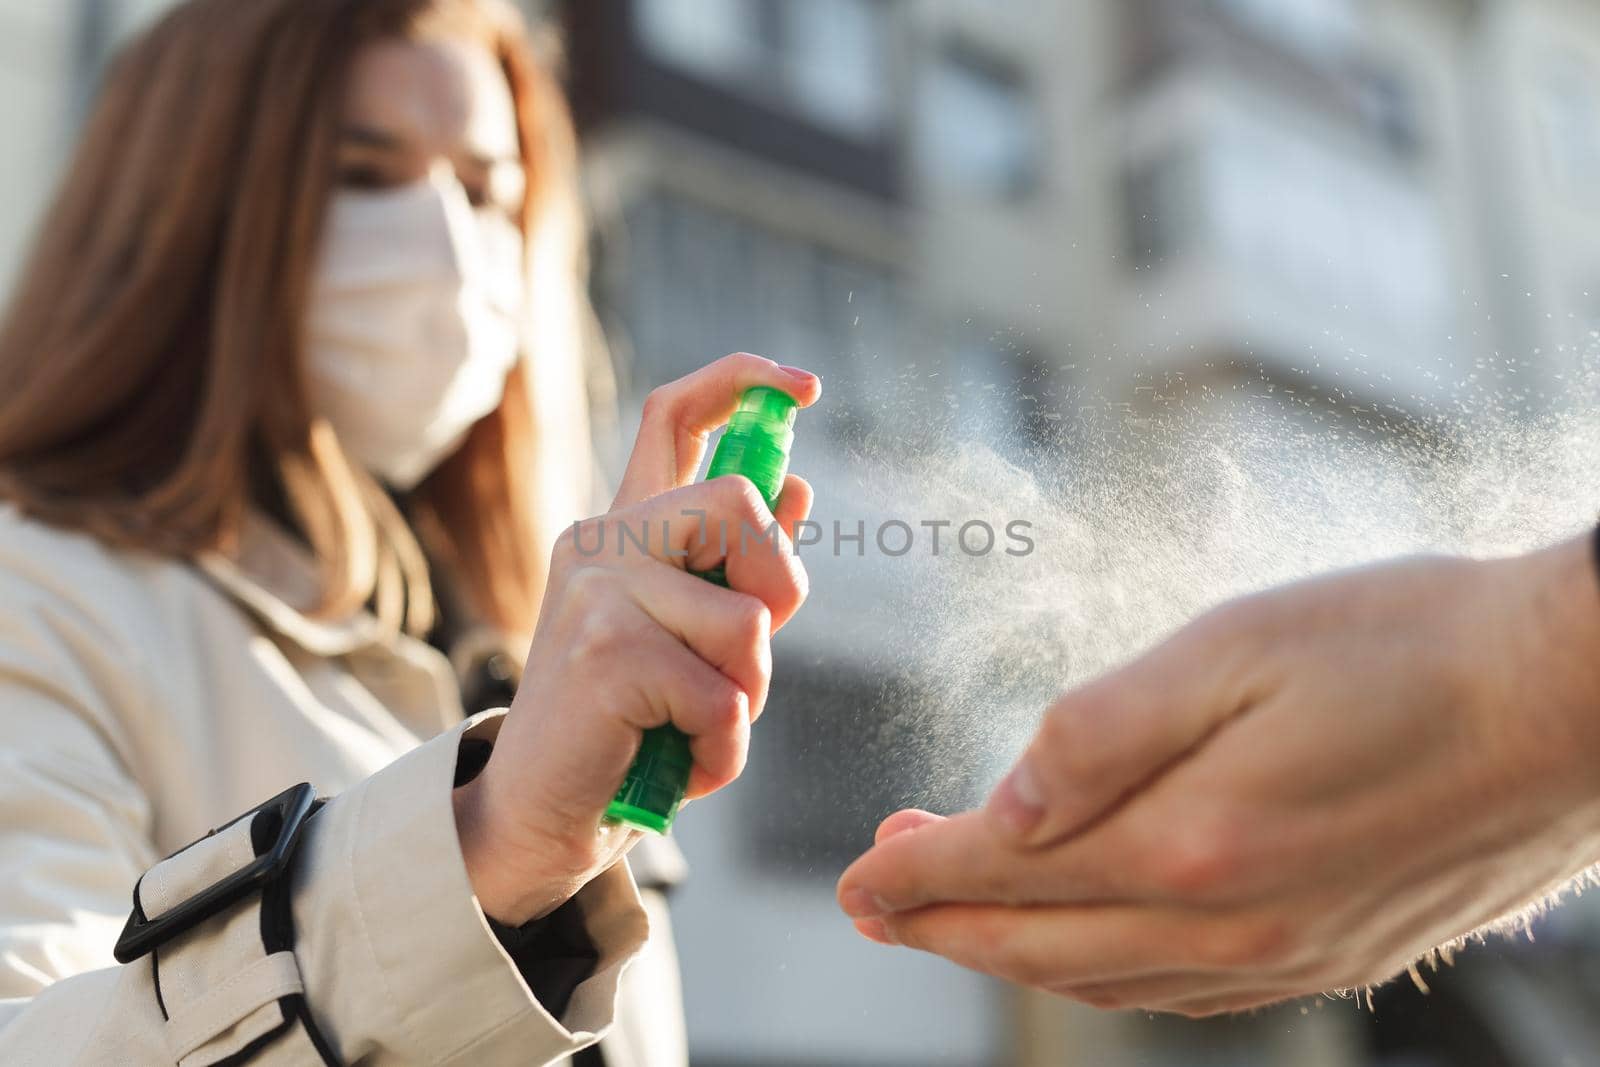 People who use alcohol-based antiseptic gel and wear a preventive mask prevent infection with the Covid-19 coronavirus outbreak, a woman washes a man's hands with hand sanitizer.